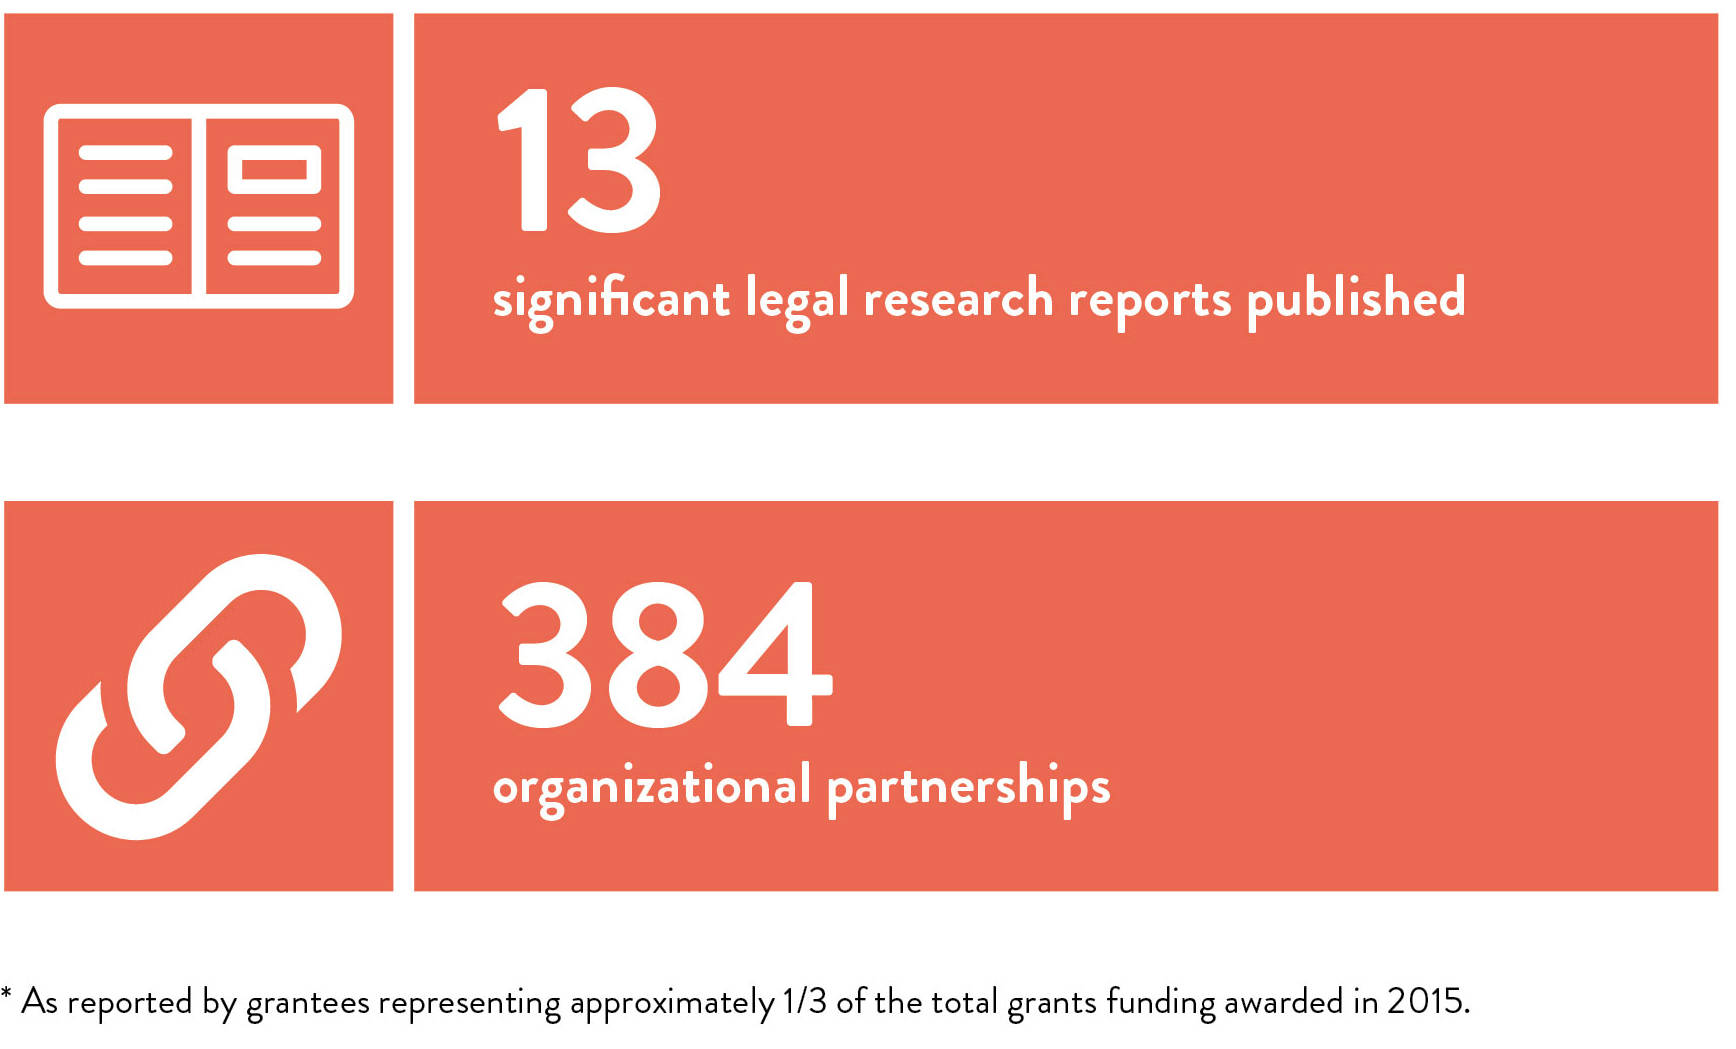 13 significant legal research reports published; 384 organizational partnerships